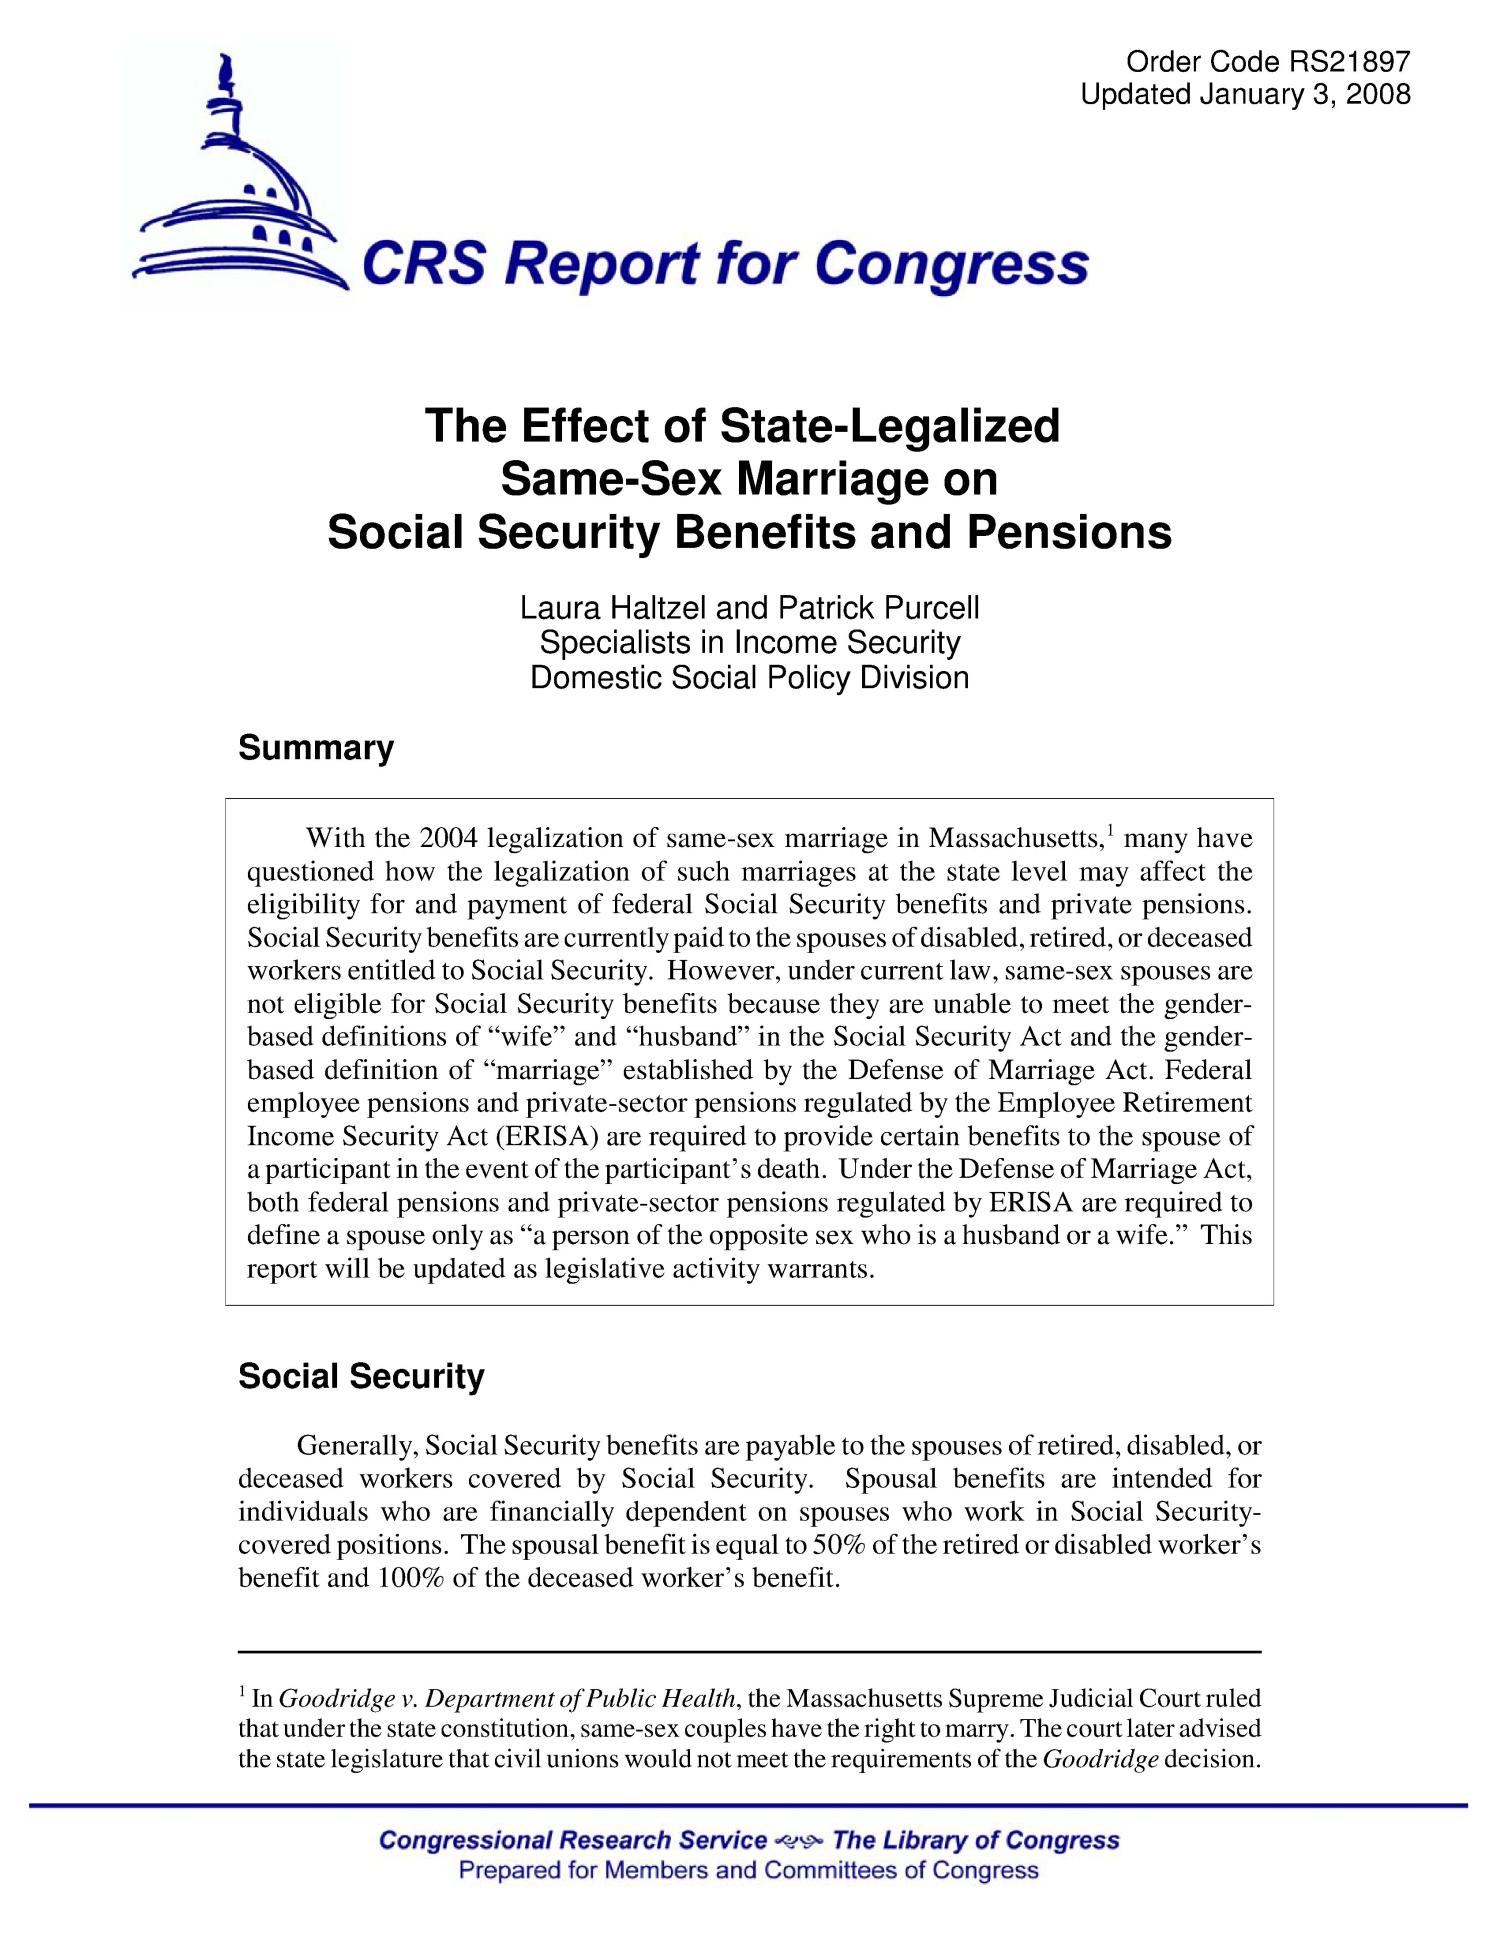 The Effect Of State Legalized Same Sex Marriage On Social Security 1825